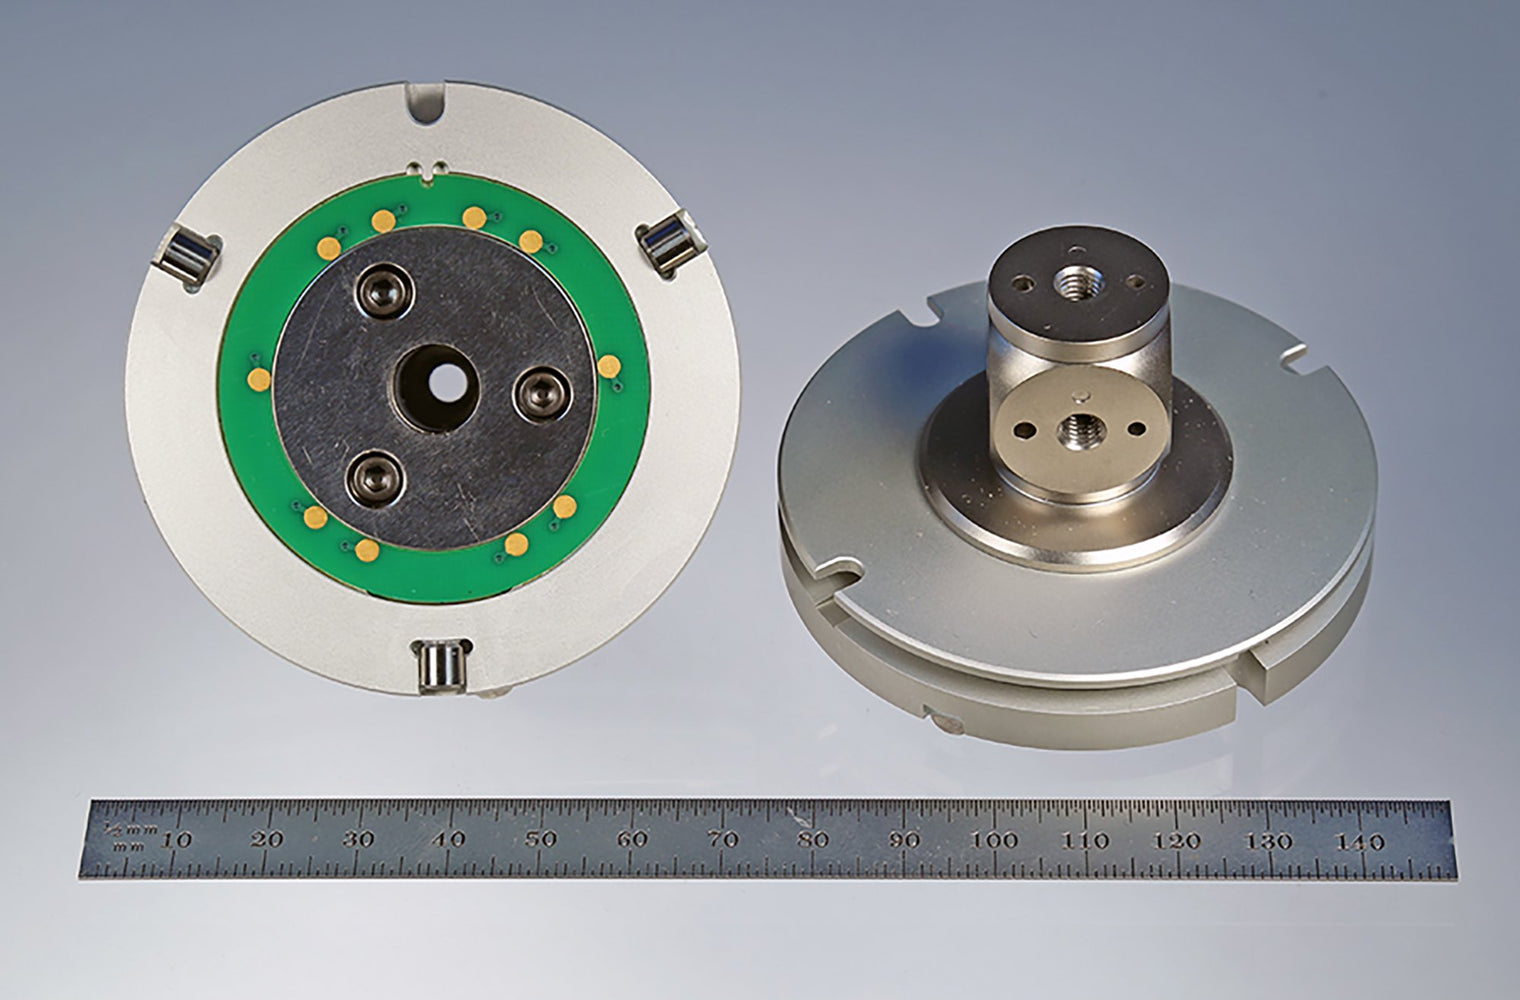 Adapter plate with ID chip and titanium Pro Fit cube for VAST probe heads.  Weight is 154.13 grams.  Compare to Zeiss 626107-2000-961.